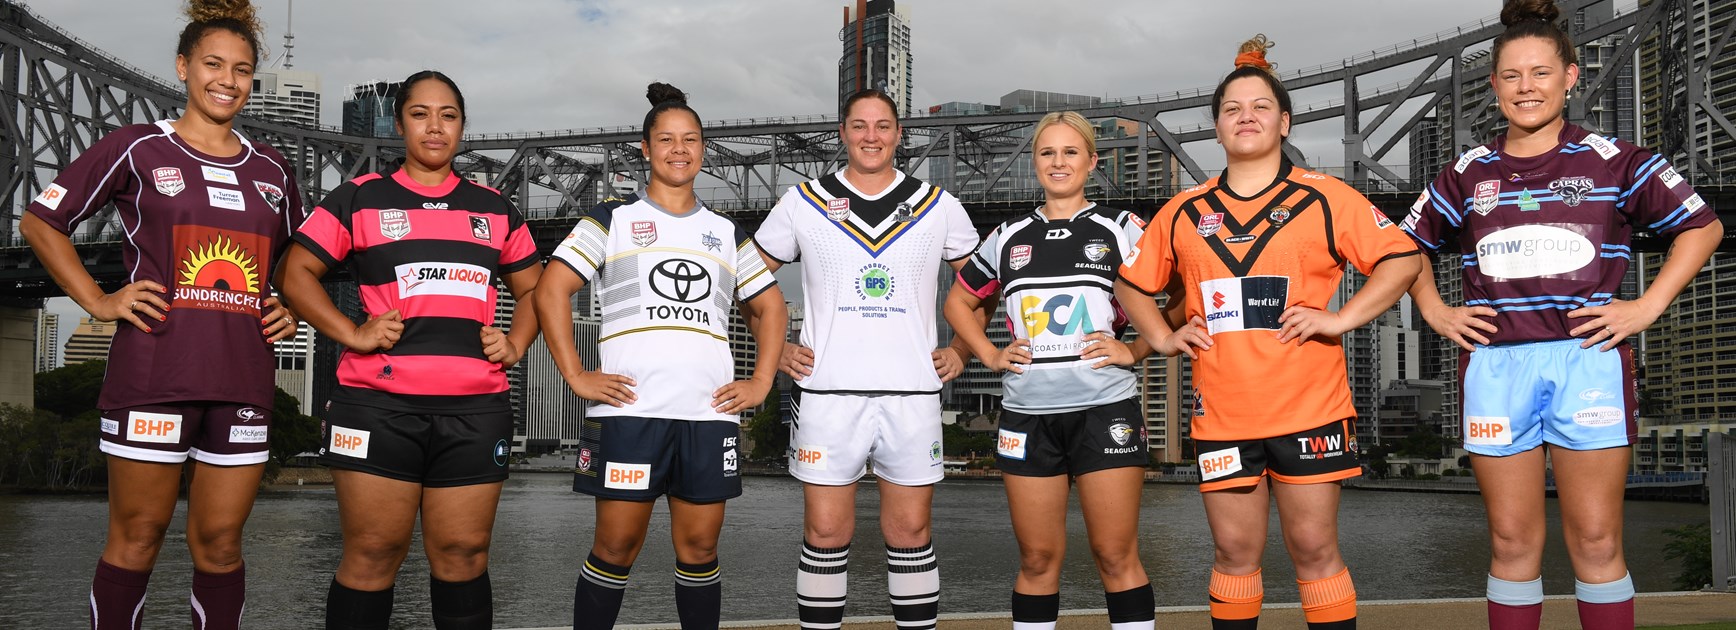 New era begins with launch of BHP Premiership